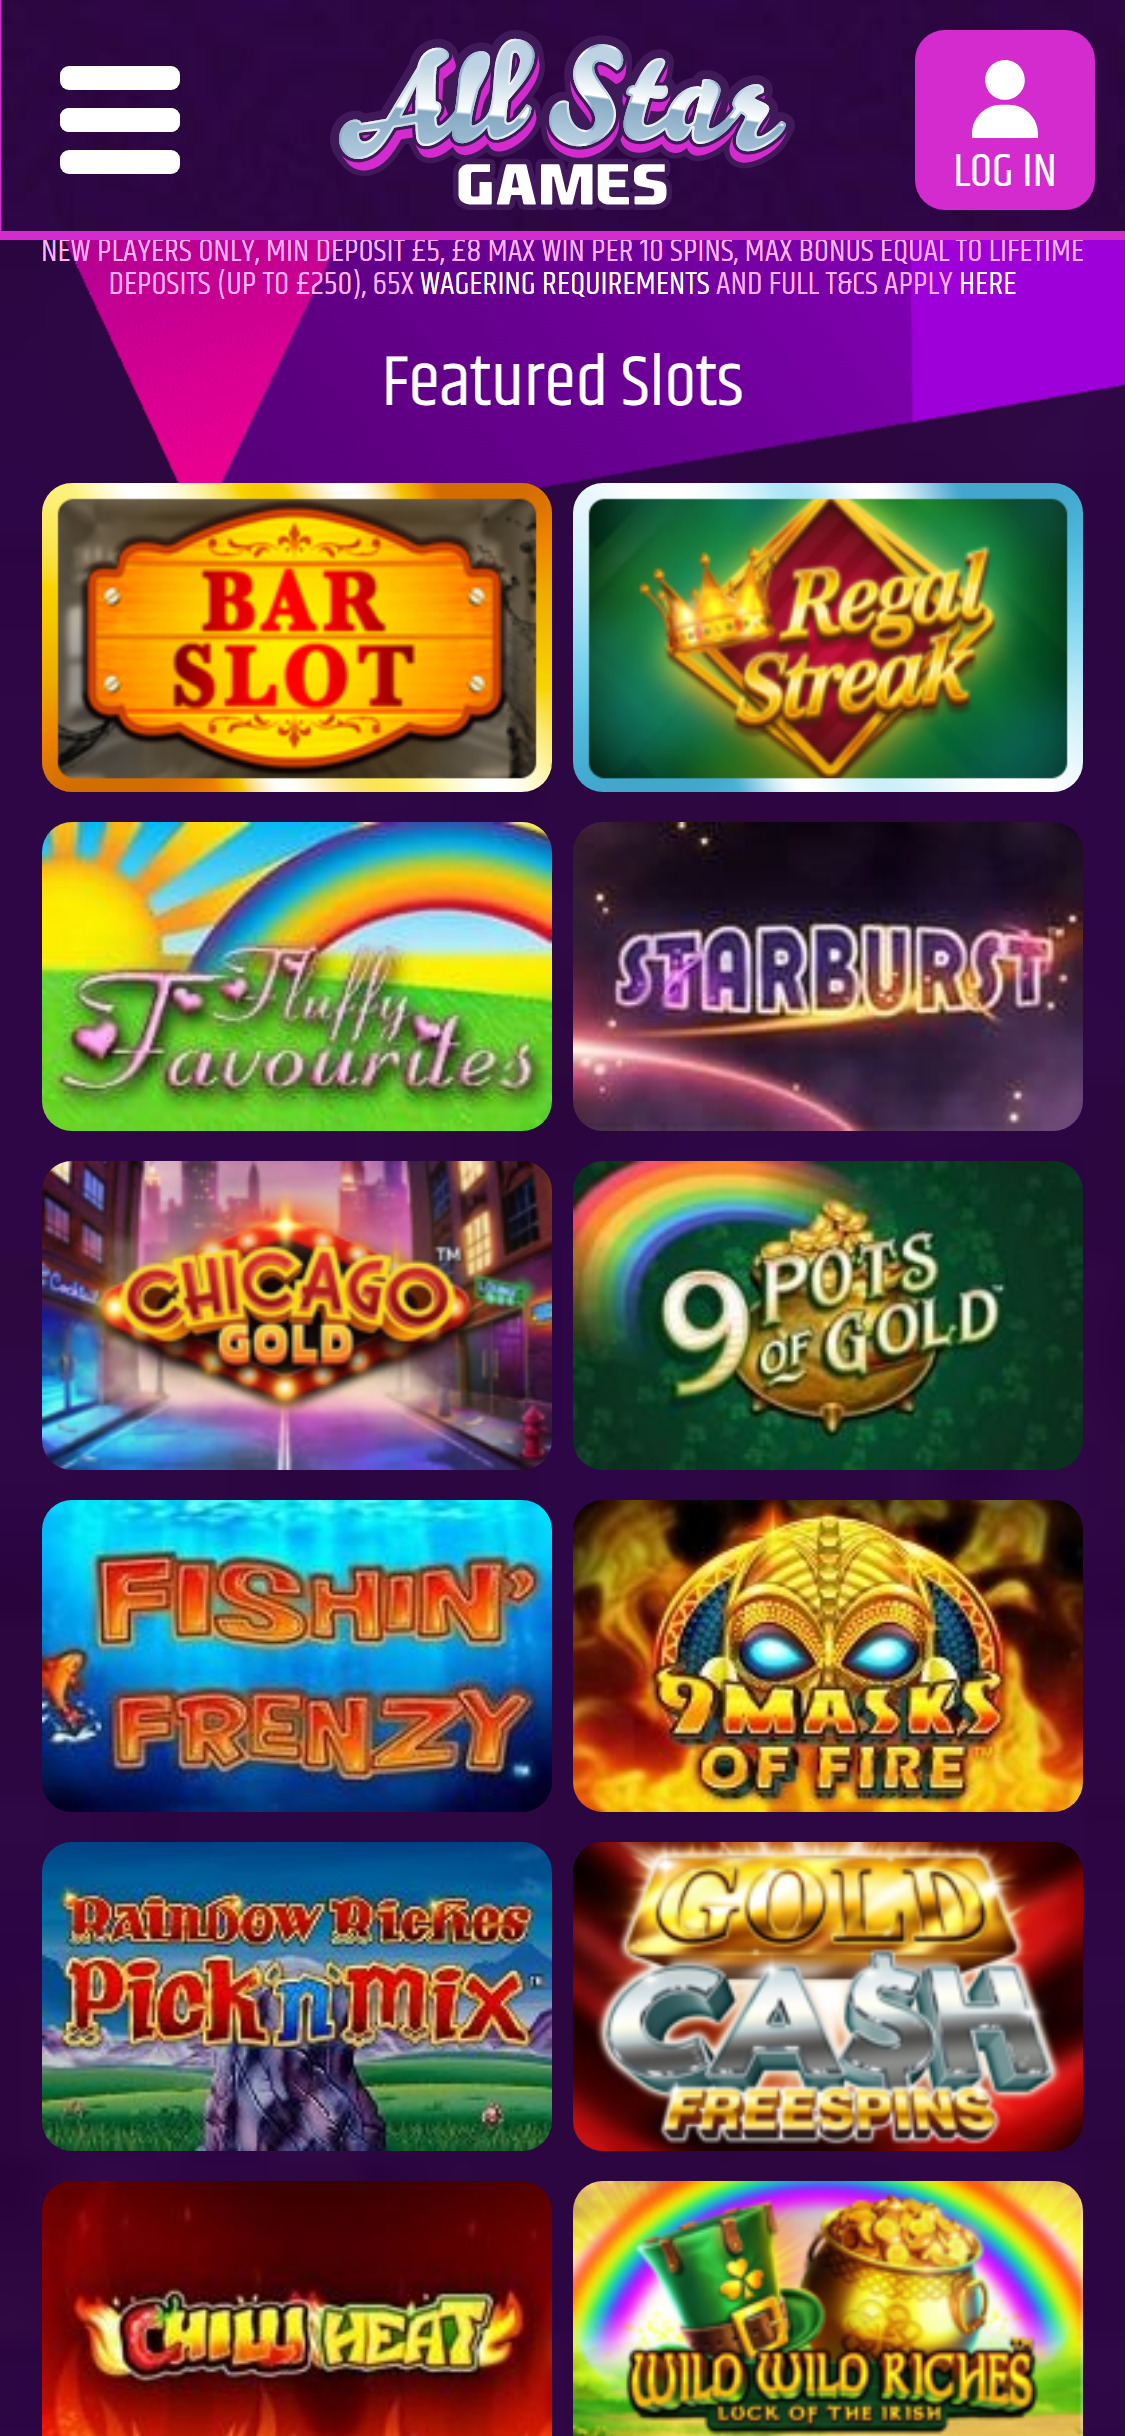 All Star Games Casino Mobile Games Review